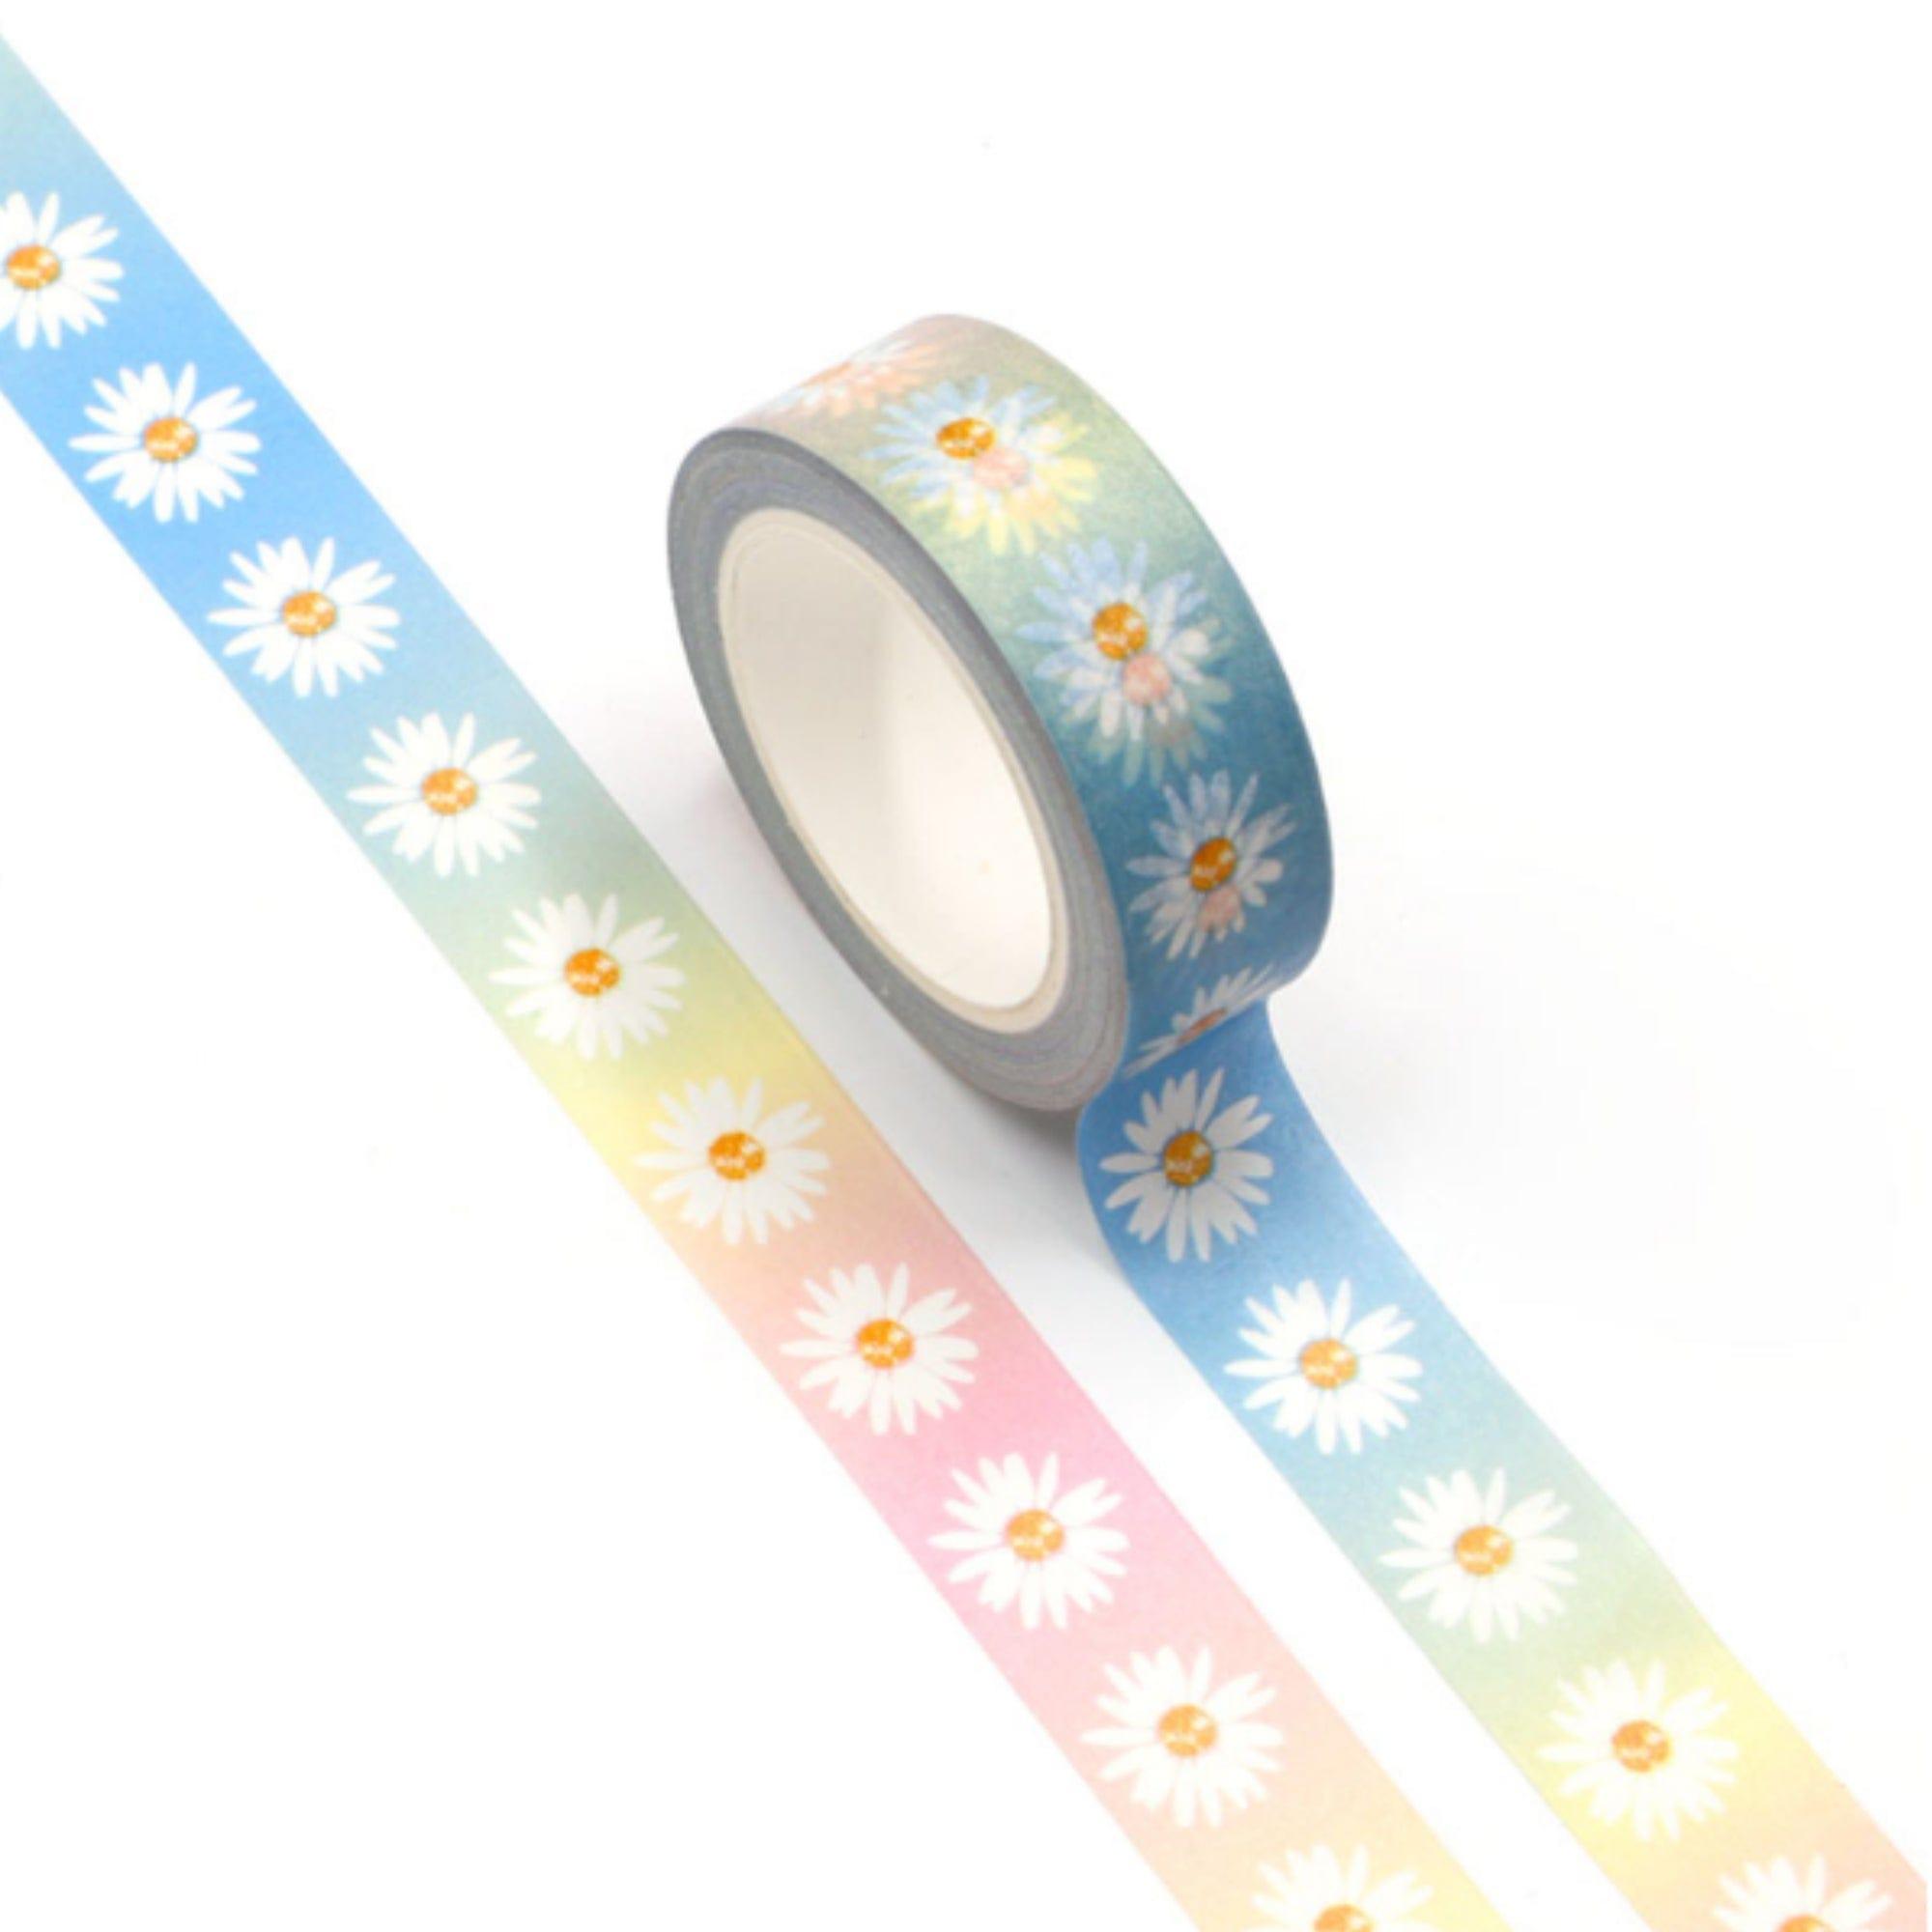 TW Collection Watercolor Spring Daisies Scrapbook Washi Tape by SSC Designs - 15mm x 30 Feet